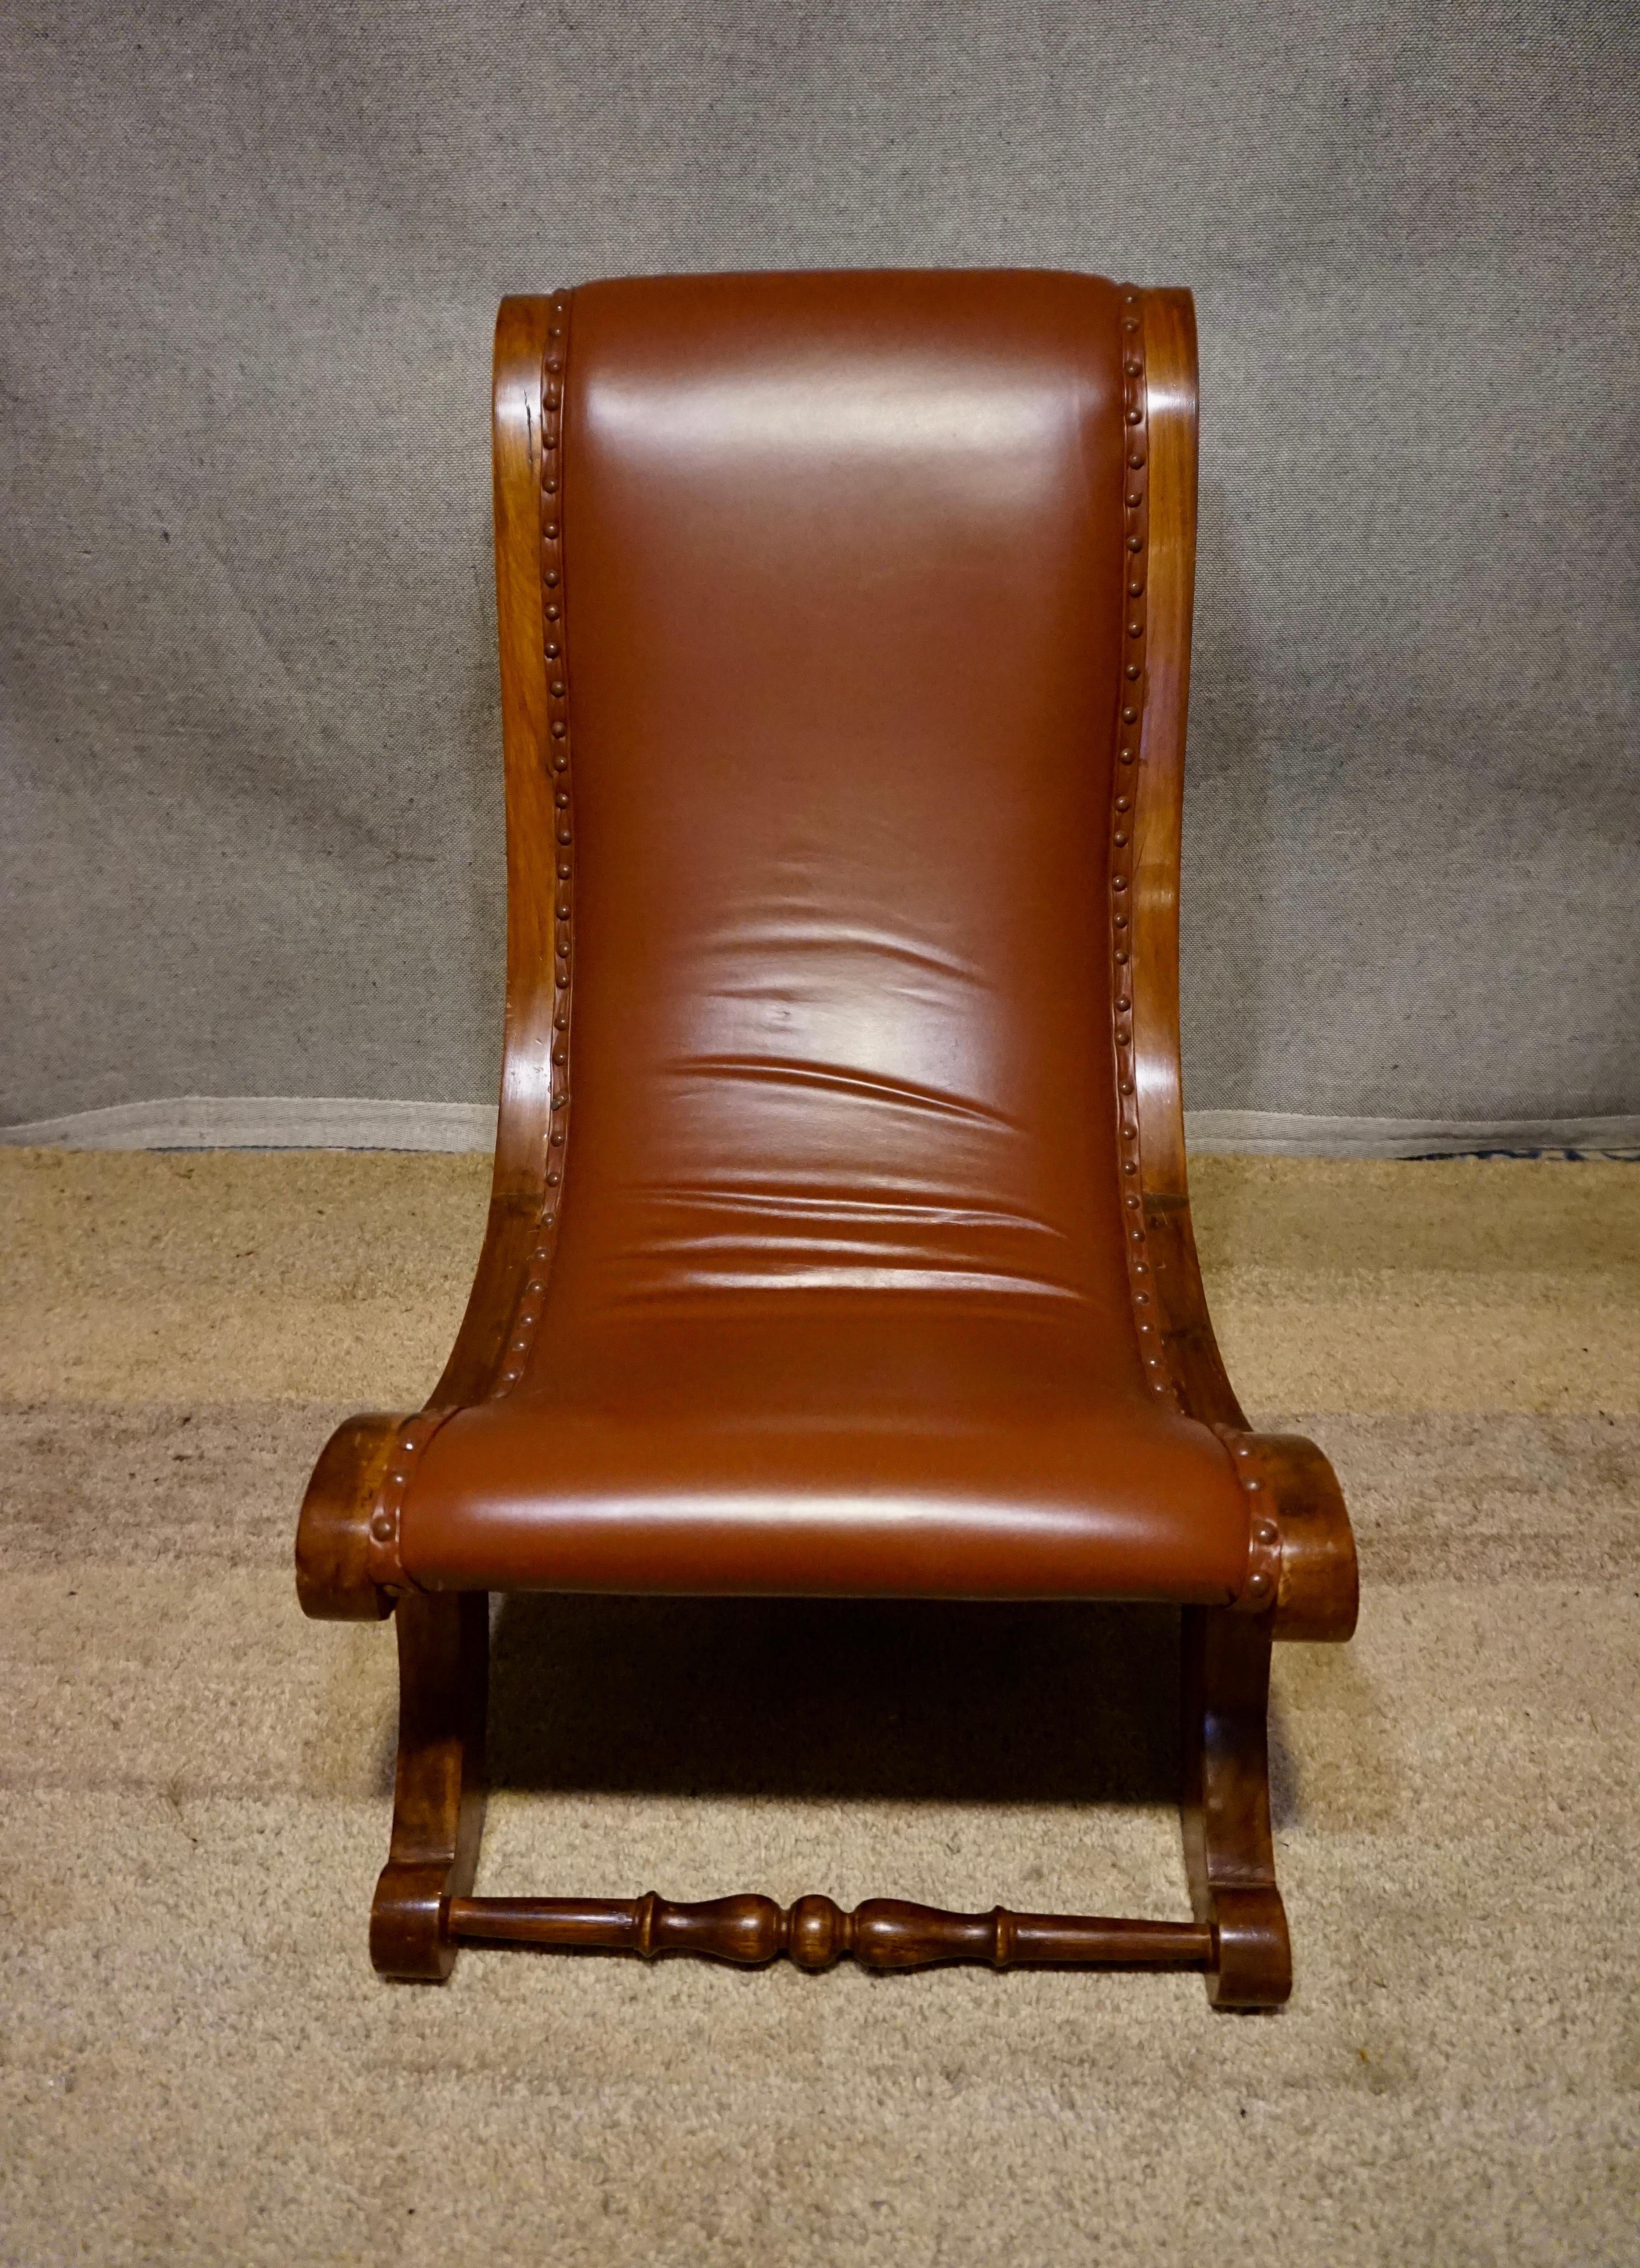 Carved British Colonial Teak Slipper Chair With Leather Upholstery For Sale